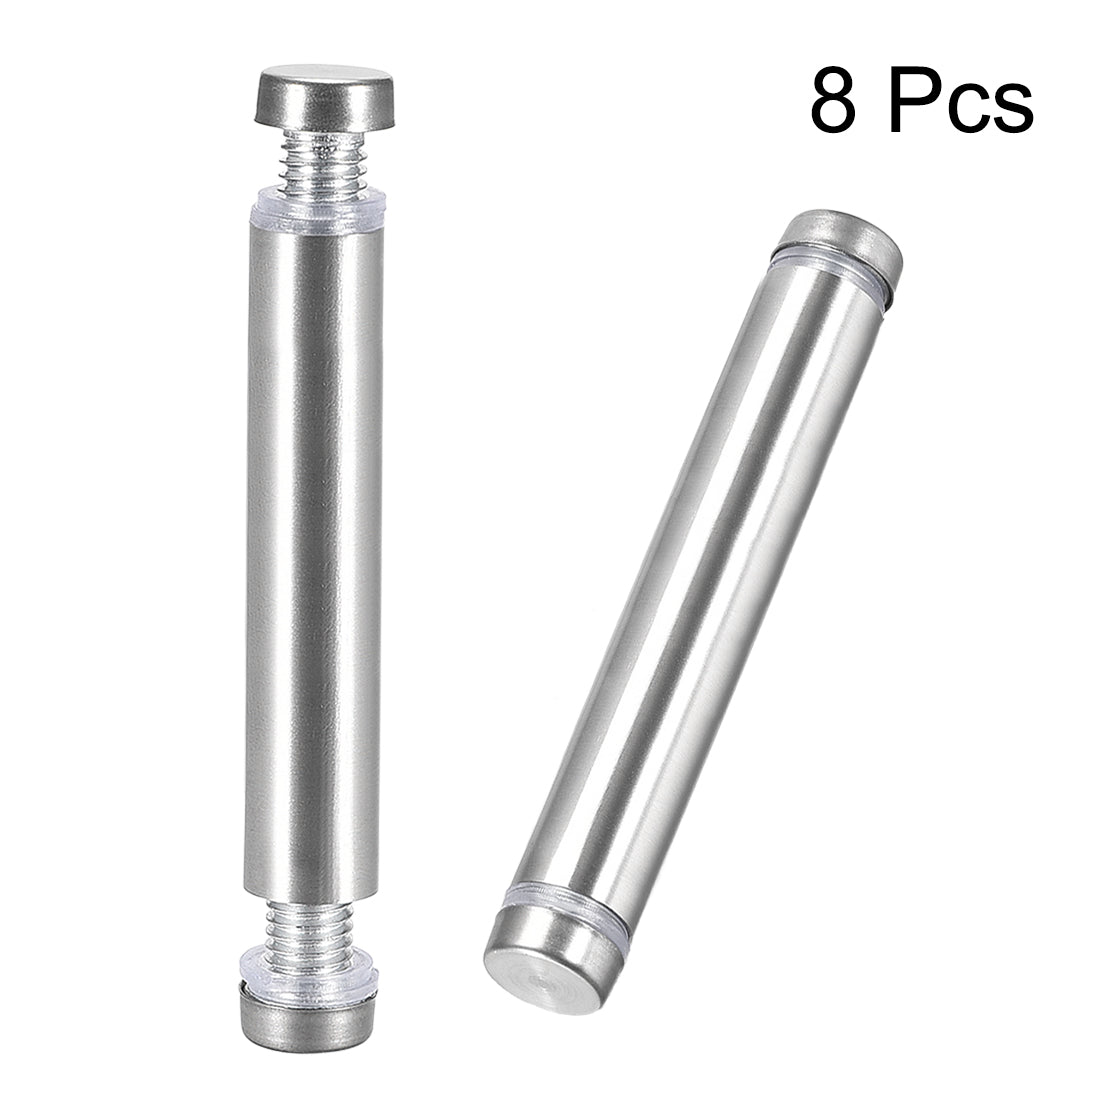 uxcell Uxcell Glass Standoff Double Head Stainless Steel Standoff Holder 12mm x 74mm 8 Pcs